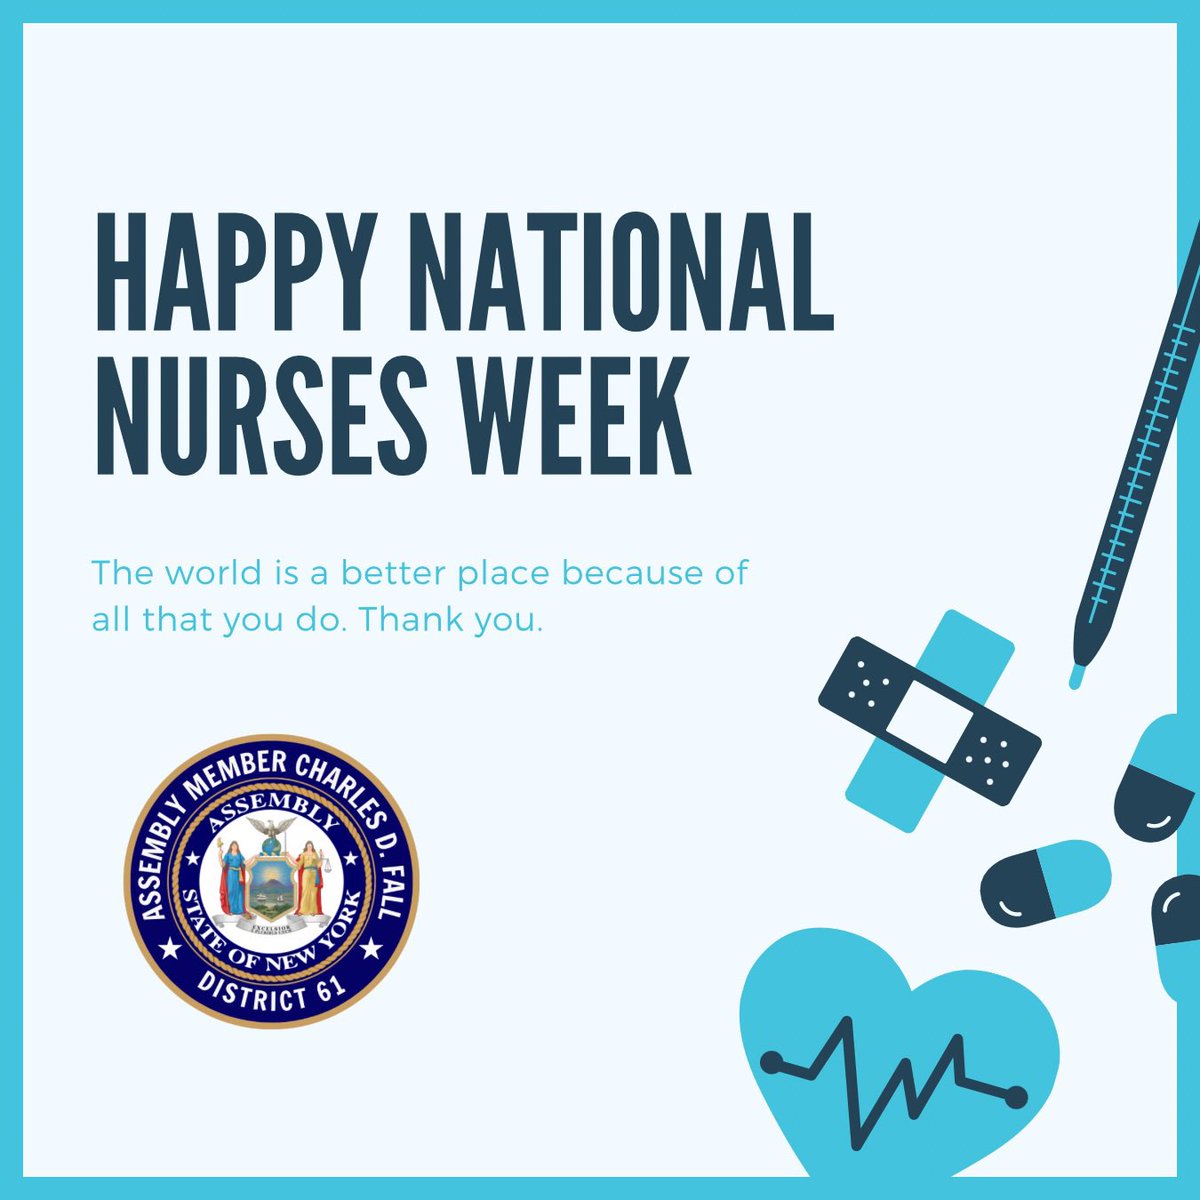 On #NationalNursesWeek, I extend my deepest gratitude to the nurses who selflessly serve our communities. Your dedication and compassion make a world of difference, and we stand with you in your ongoing fight for fair conditions and quality healthcare. Thank you! #District61